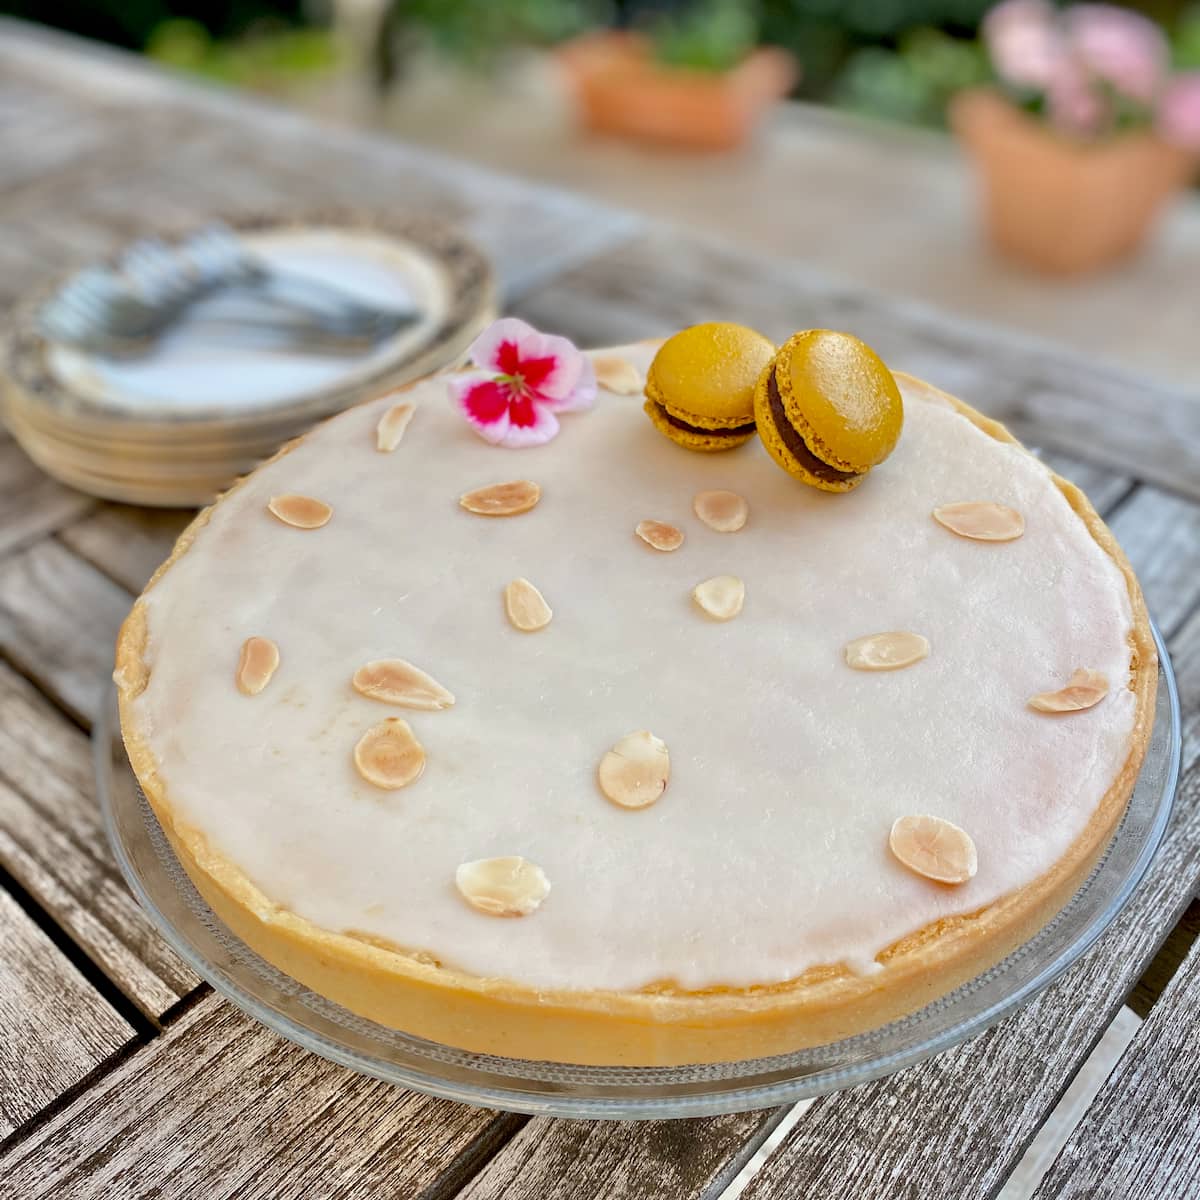 https://www.madaboutmacarons.com/wp-content/uploads/2023/08/almond-cake-with-rum-St-Germain-France.jpg